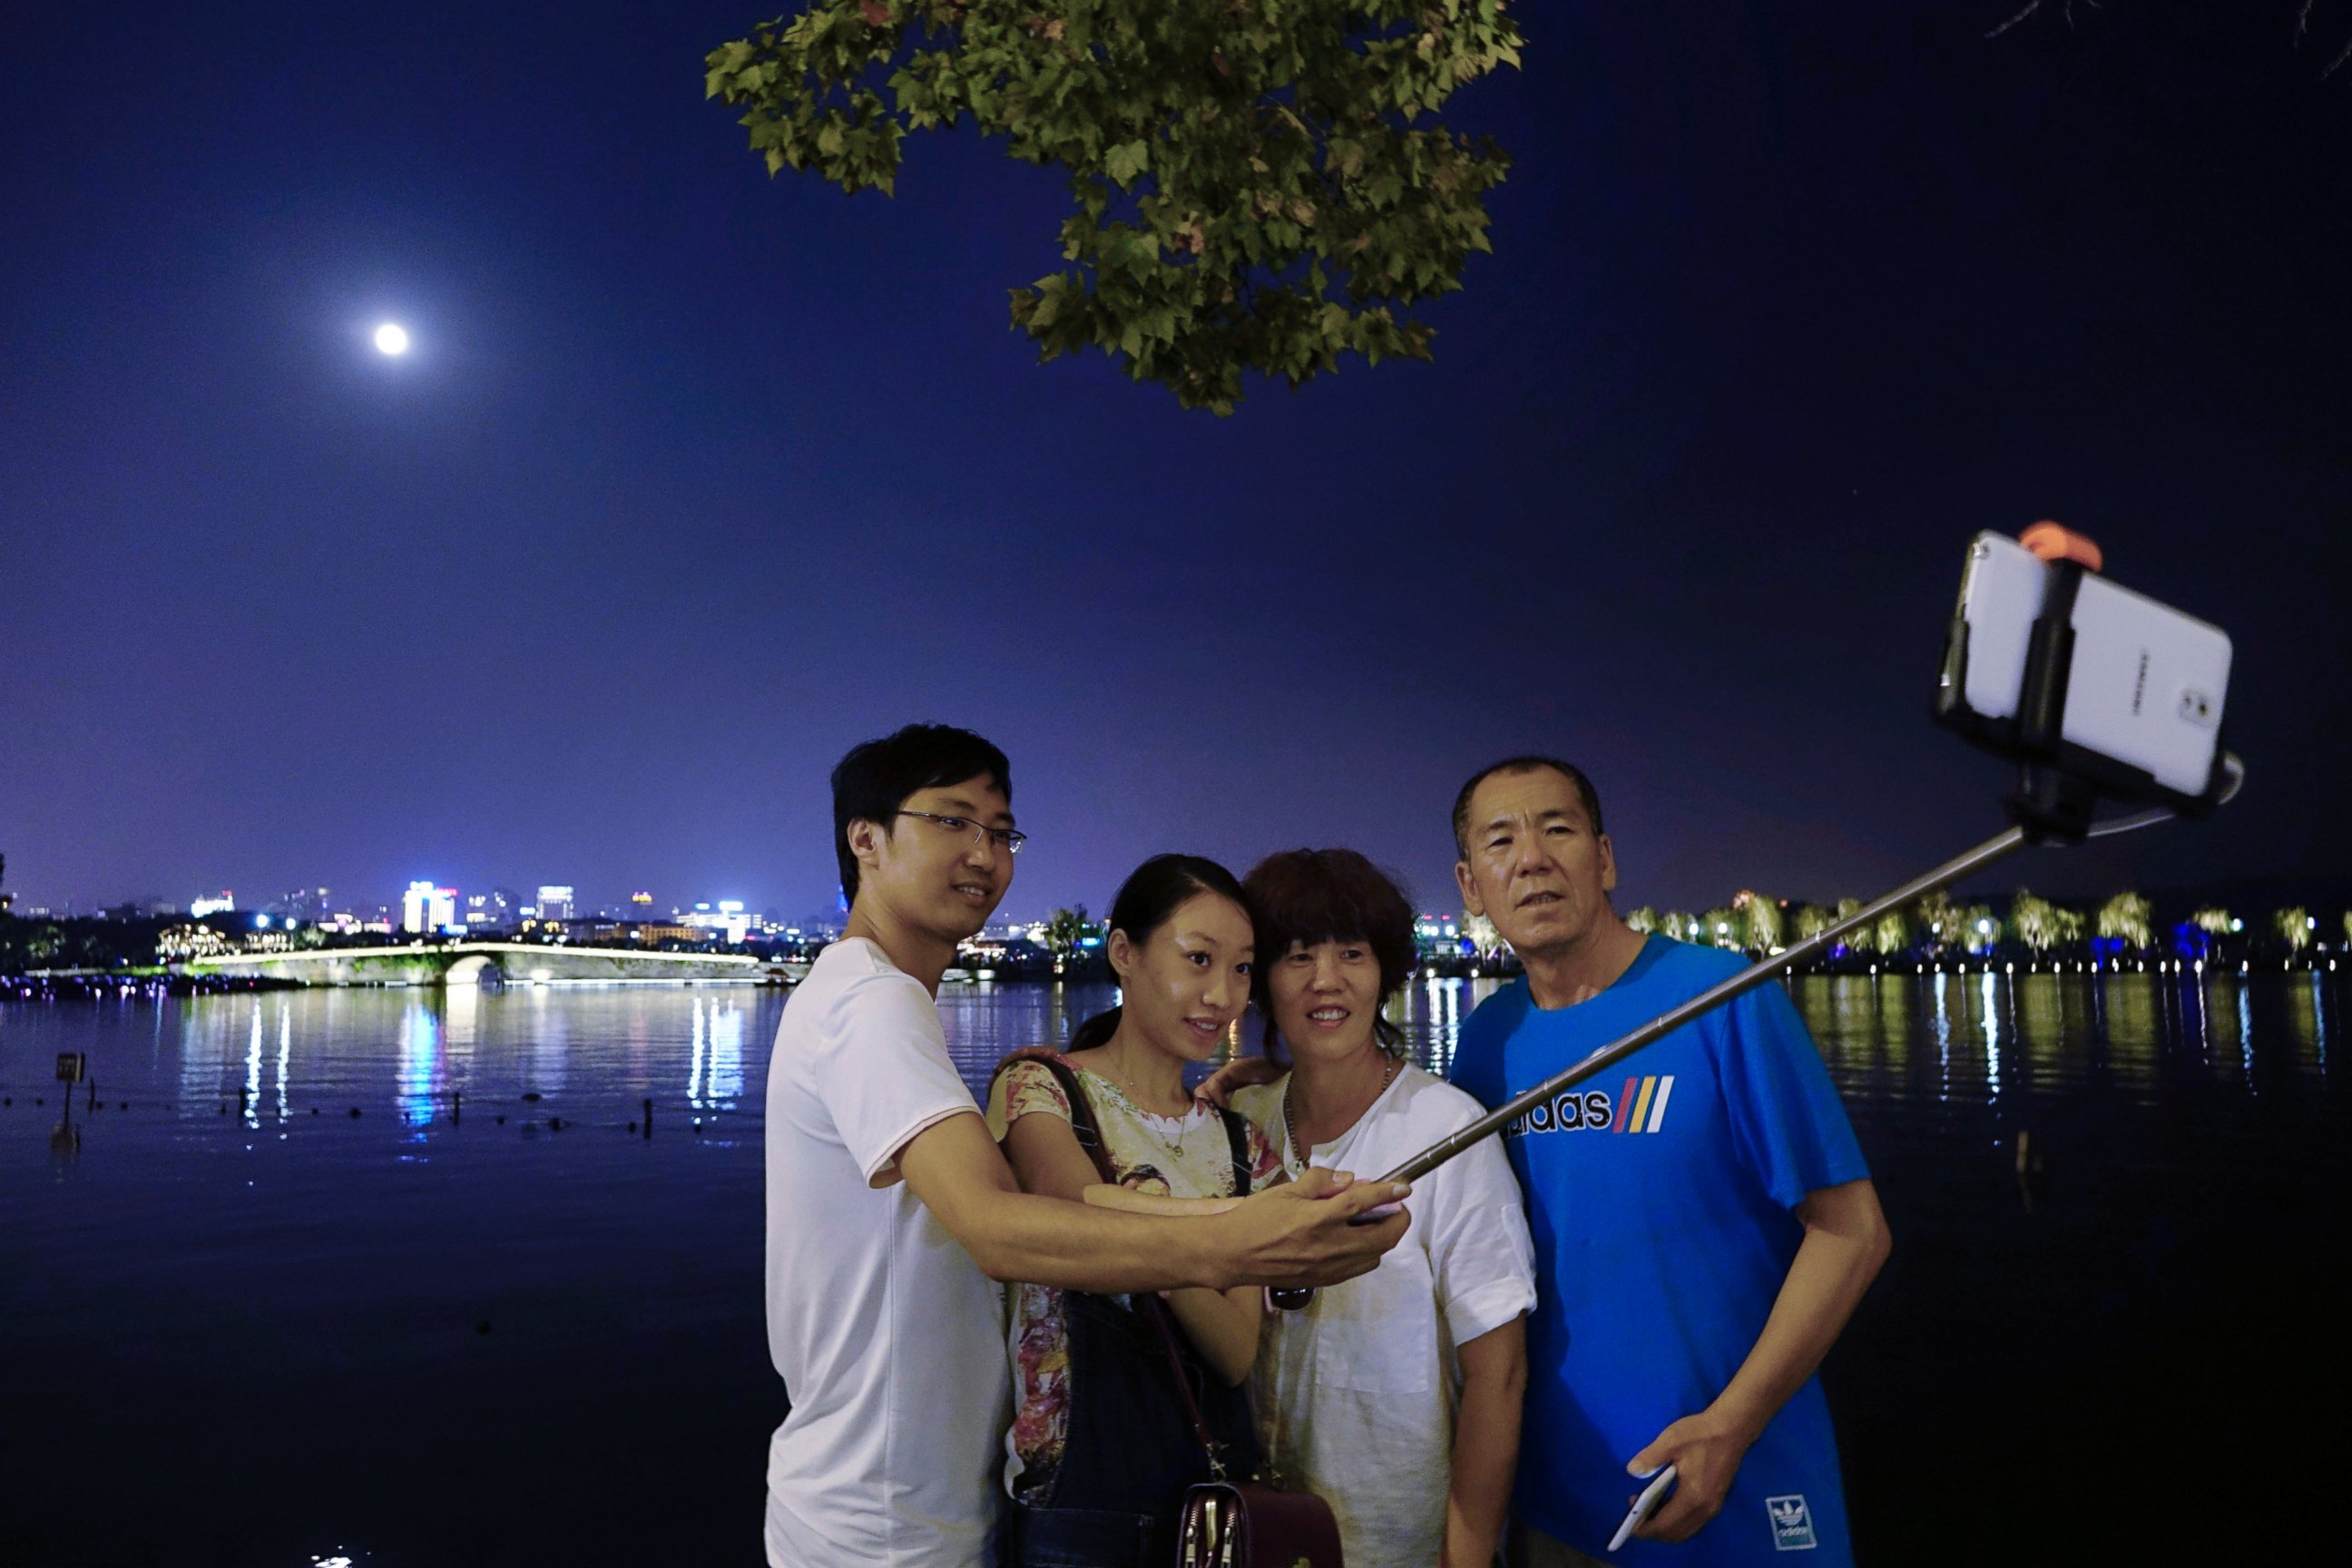 PHOTO: People take selfies with the full moon at the West Lake during the Mid-Autumn Festival, on Sept. 27, 2015 in Zaozhuang, China.